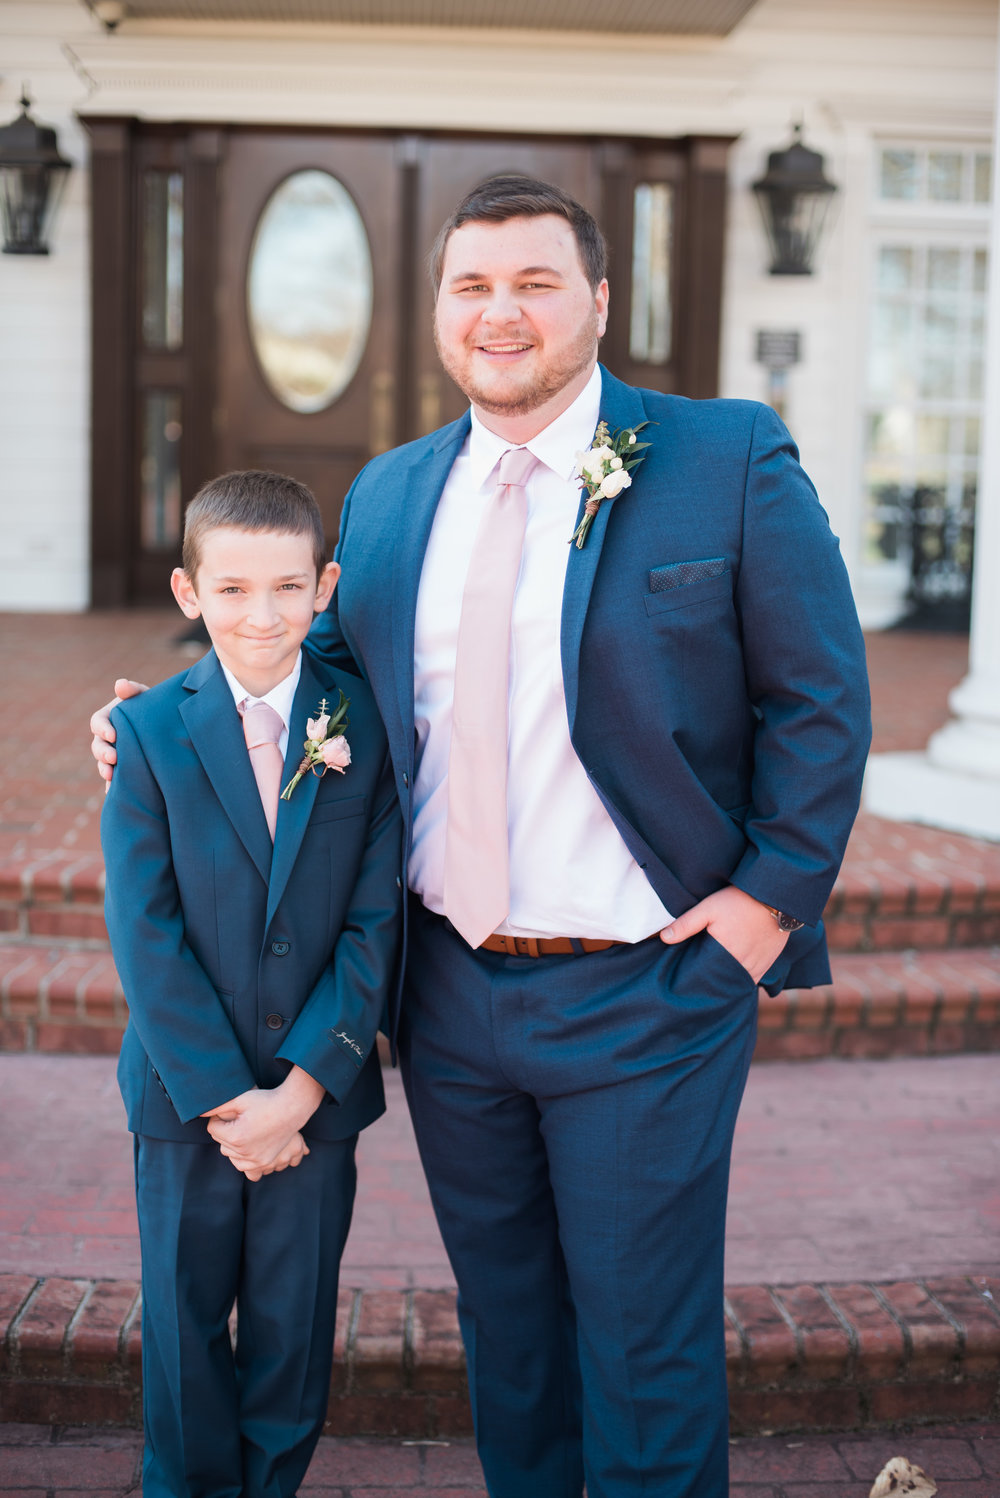 Groom and the little guy